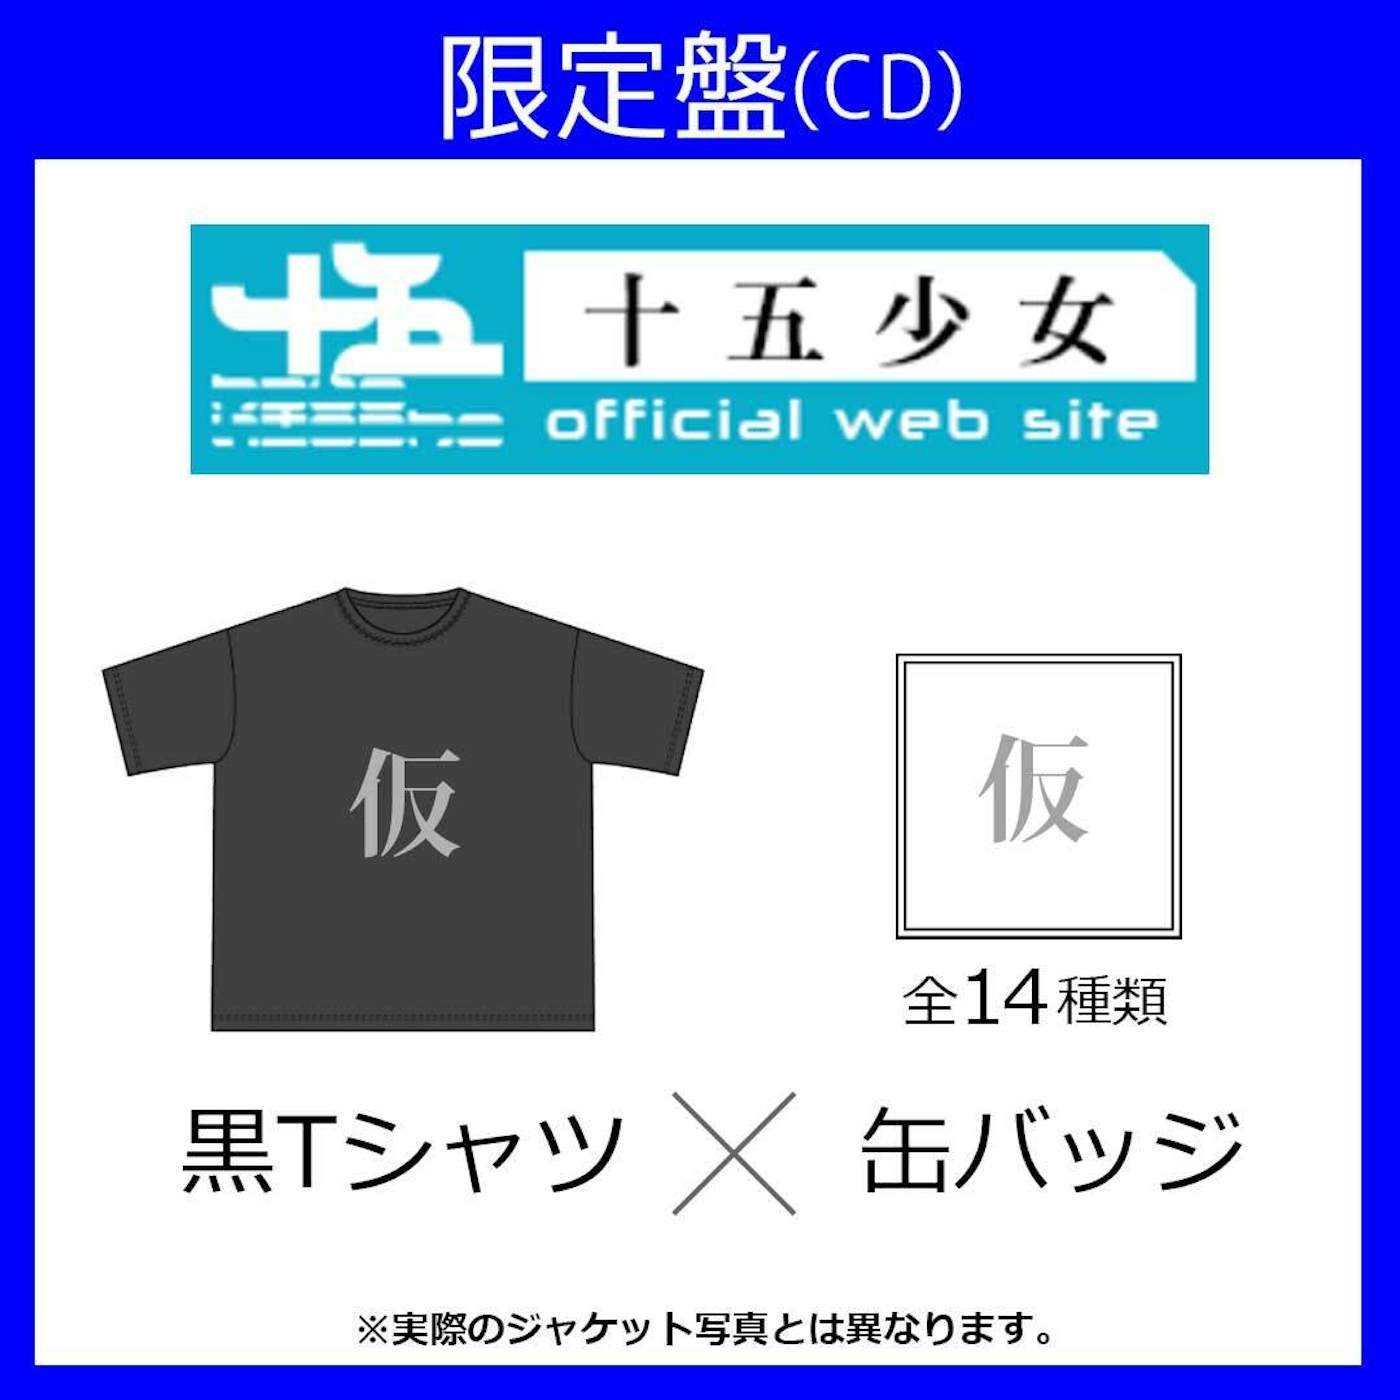 Fifteen voices ≪限定セット：缶バッジ×黒Tシャツ(L)≫SILENTHATED(2枚組AL+スマプラ)